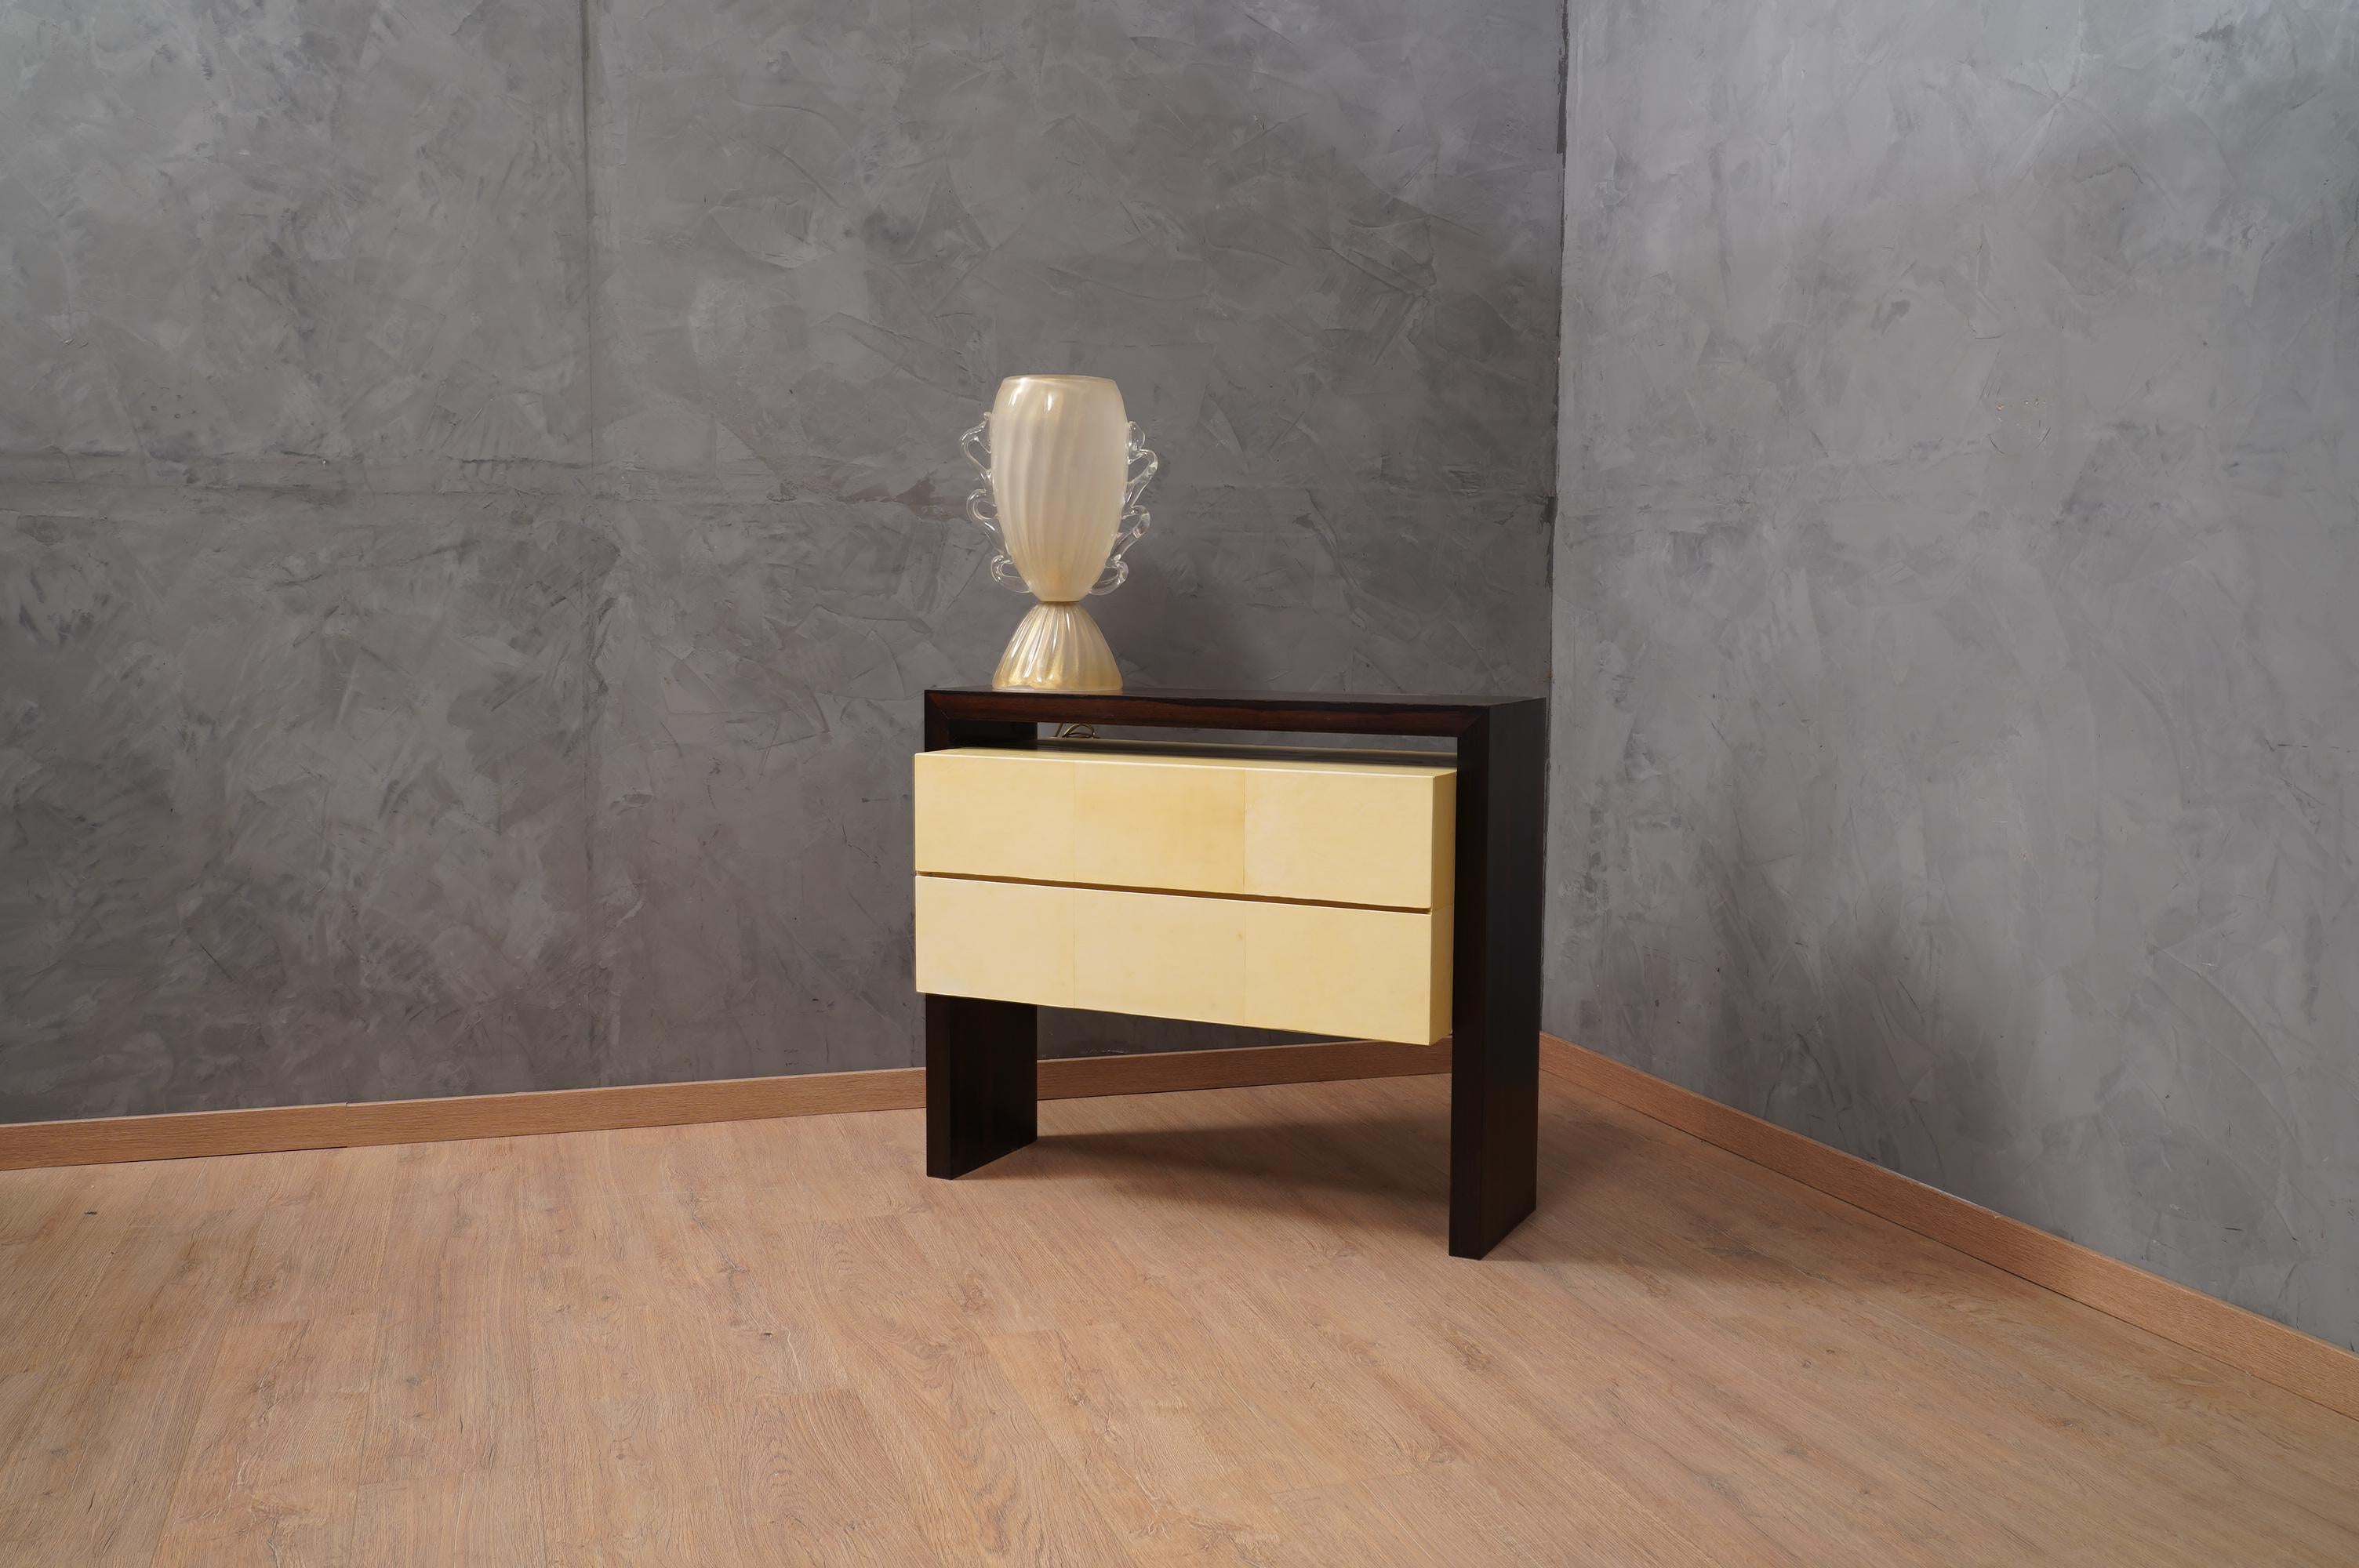 Perfect bedroom dresser all refinement and style both for the size of the entire design and for the utmost care taken for its entire finish.

A simple square design welcomes a Macassar wood veneer, with a central body positioned internally and